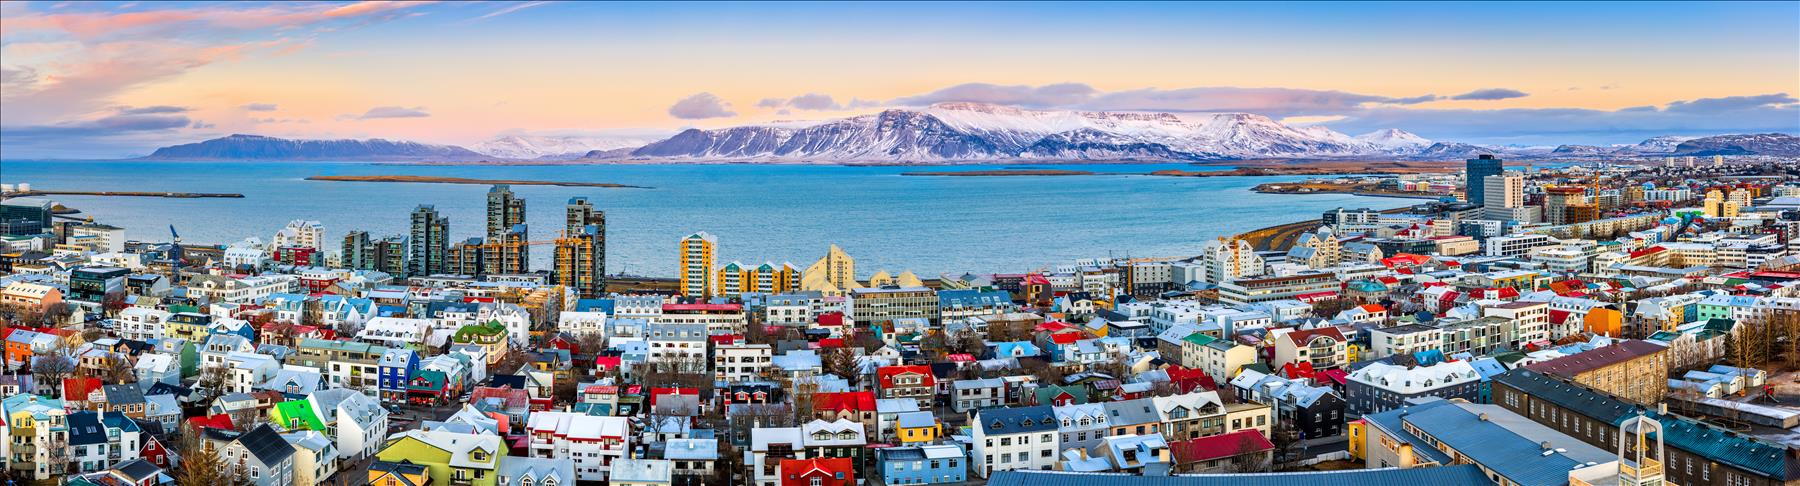 COVID-19: WHY ICELAND HAS NOT LOCKED DOWN